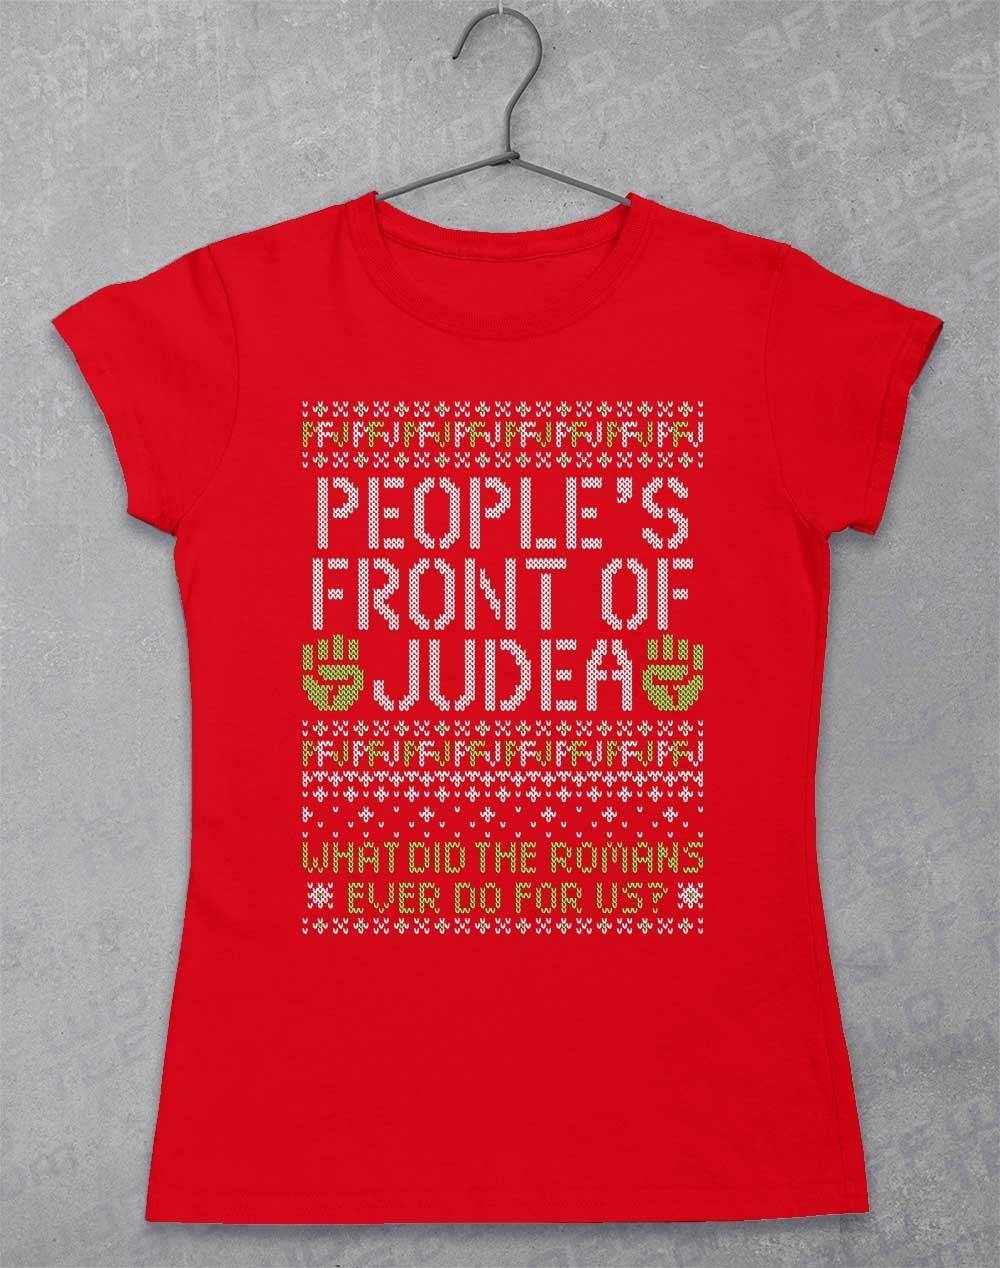 PFJ Festive Knitted-Look Women's T-Shirt 8-10 / Red  - Off World Tees